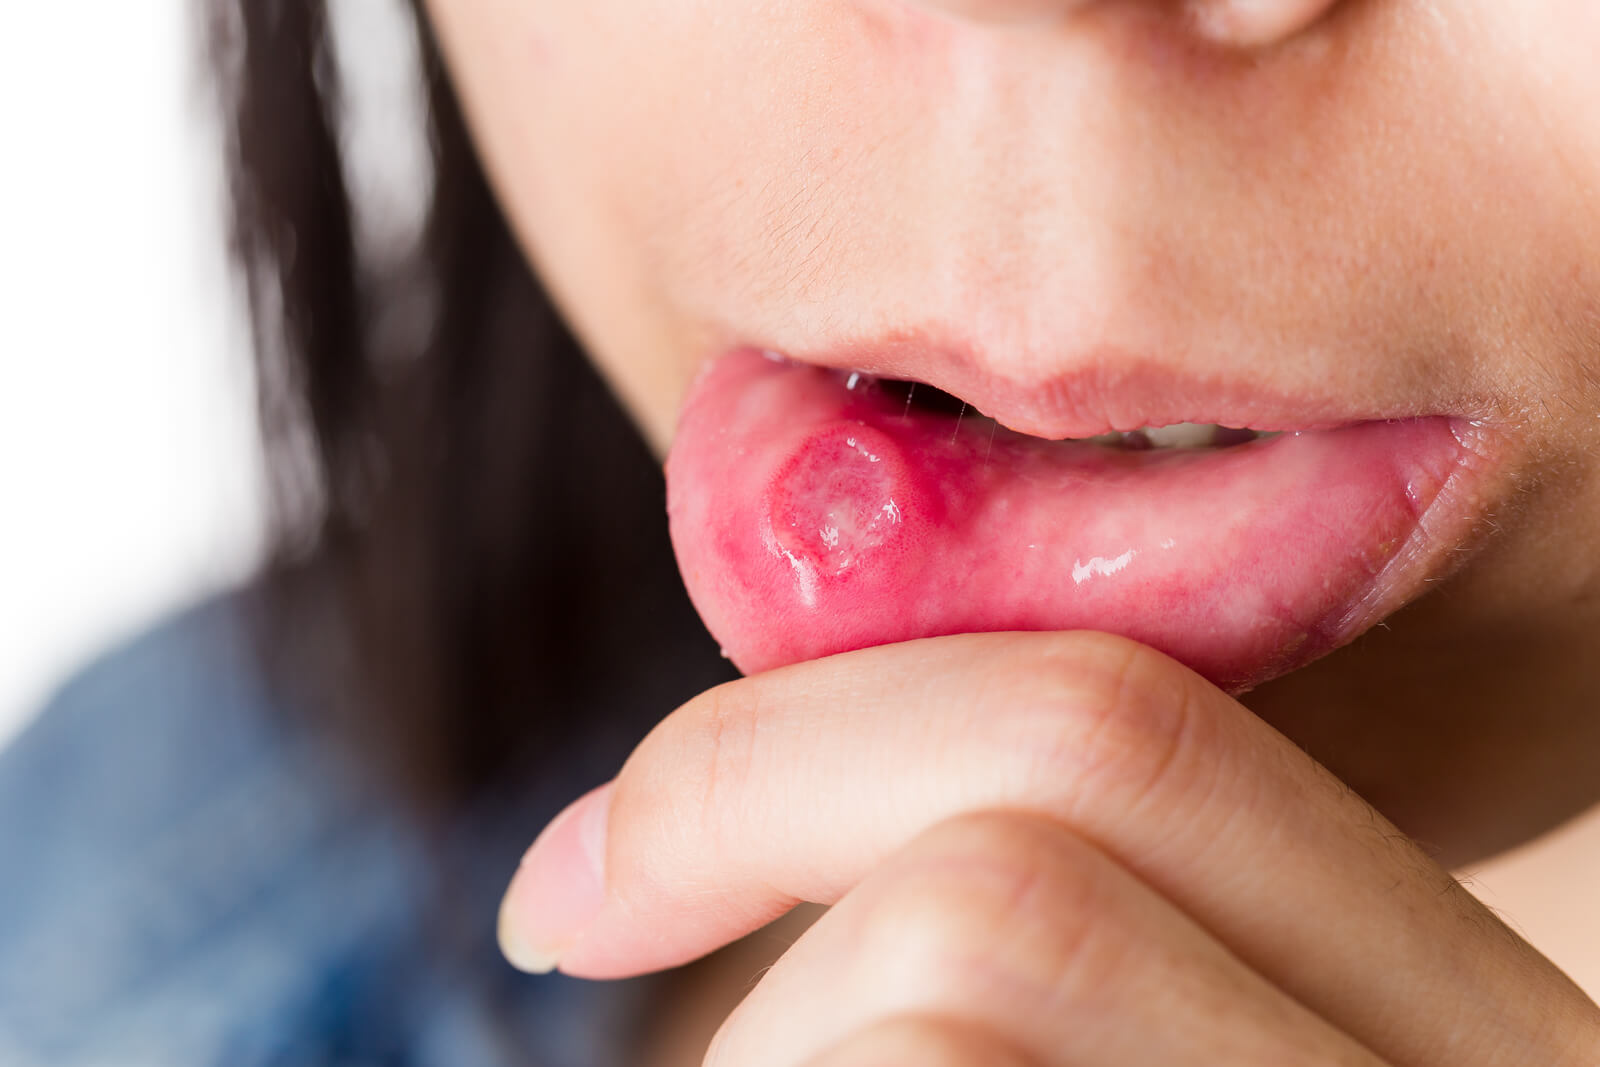 A woman with a canker sore (aphthous ulcer) on her inner lip.